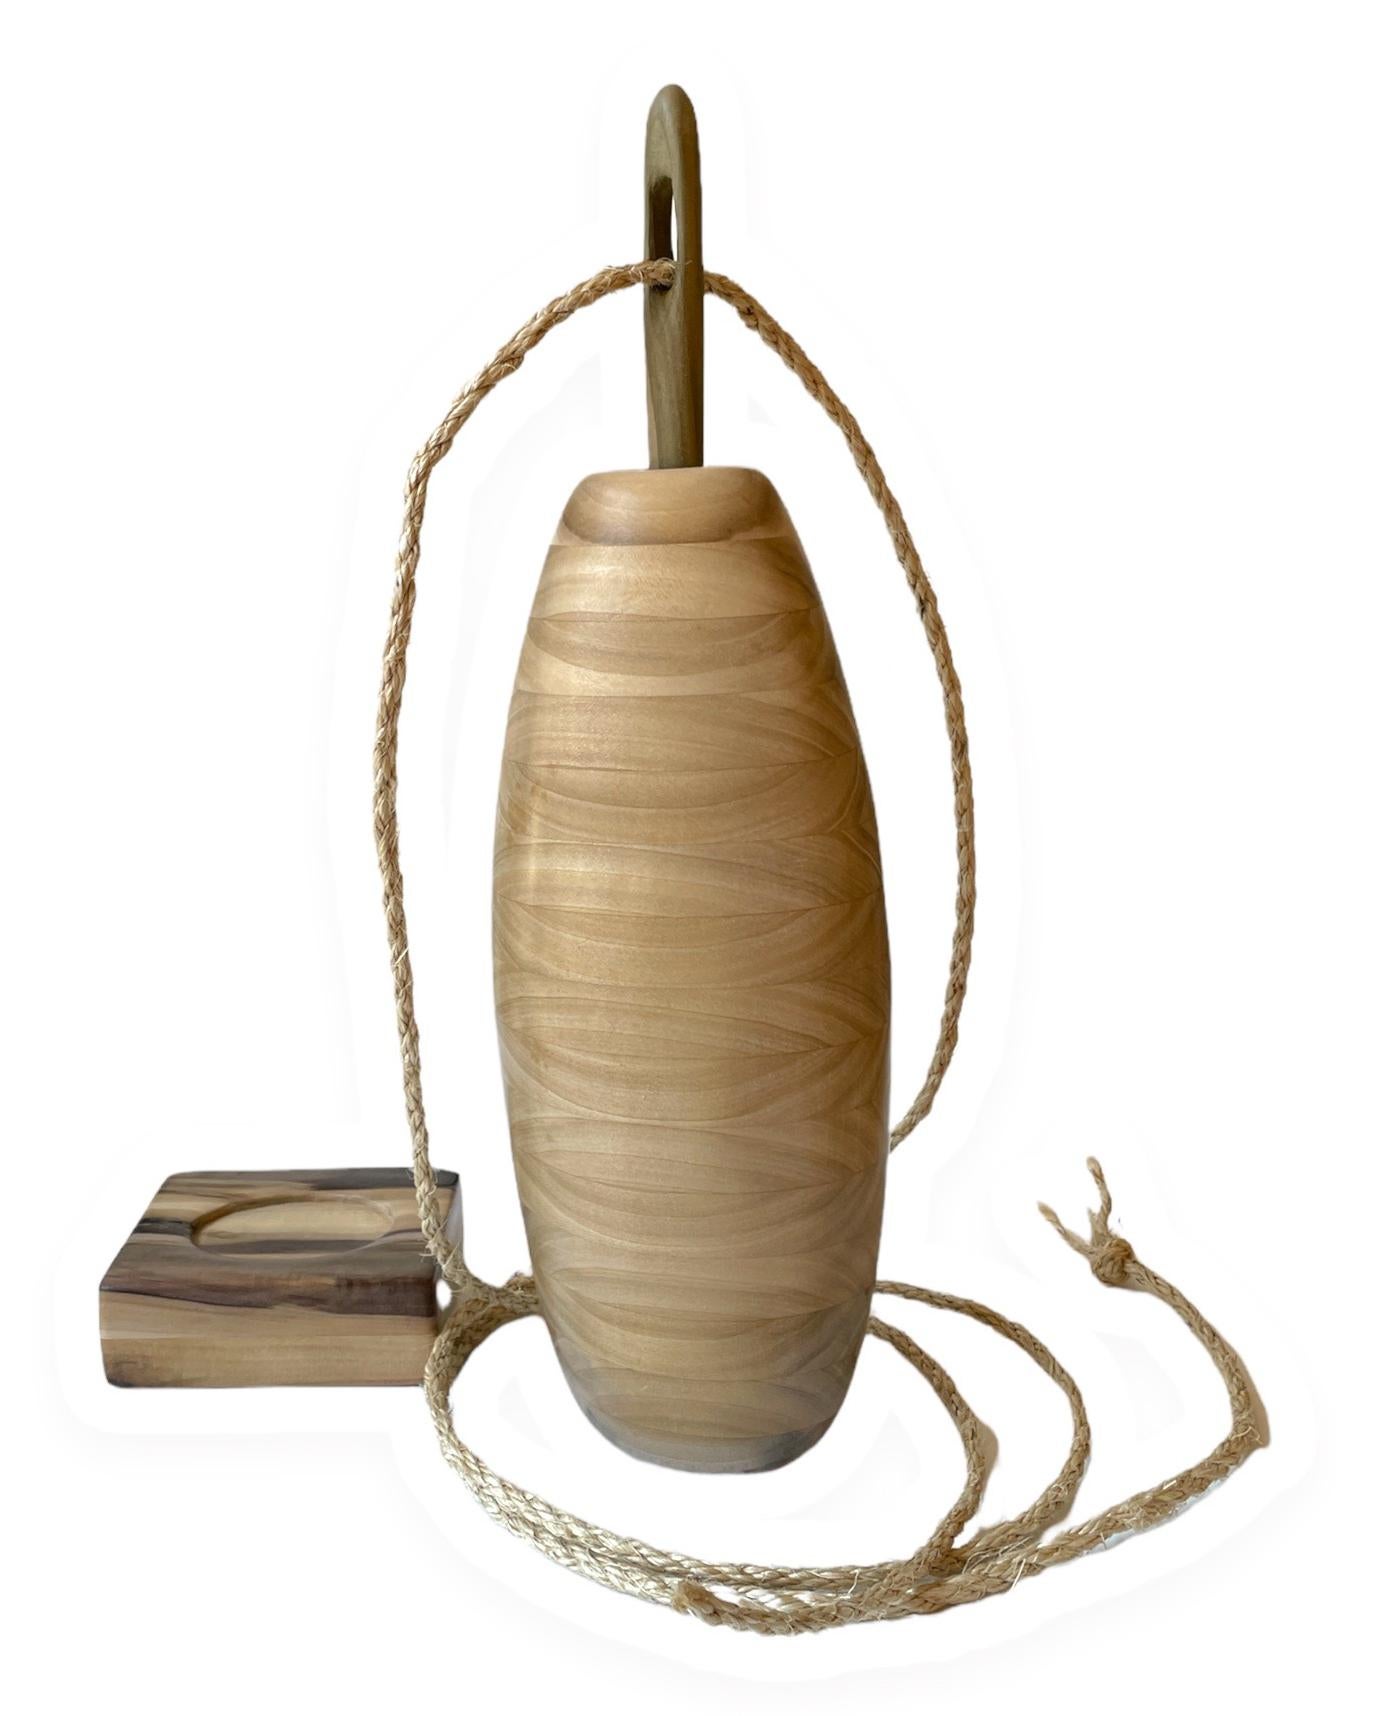 Sewn Dialog, Poplar Wood Sculpture, Vessel with Wooden Needle  3